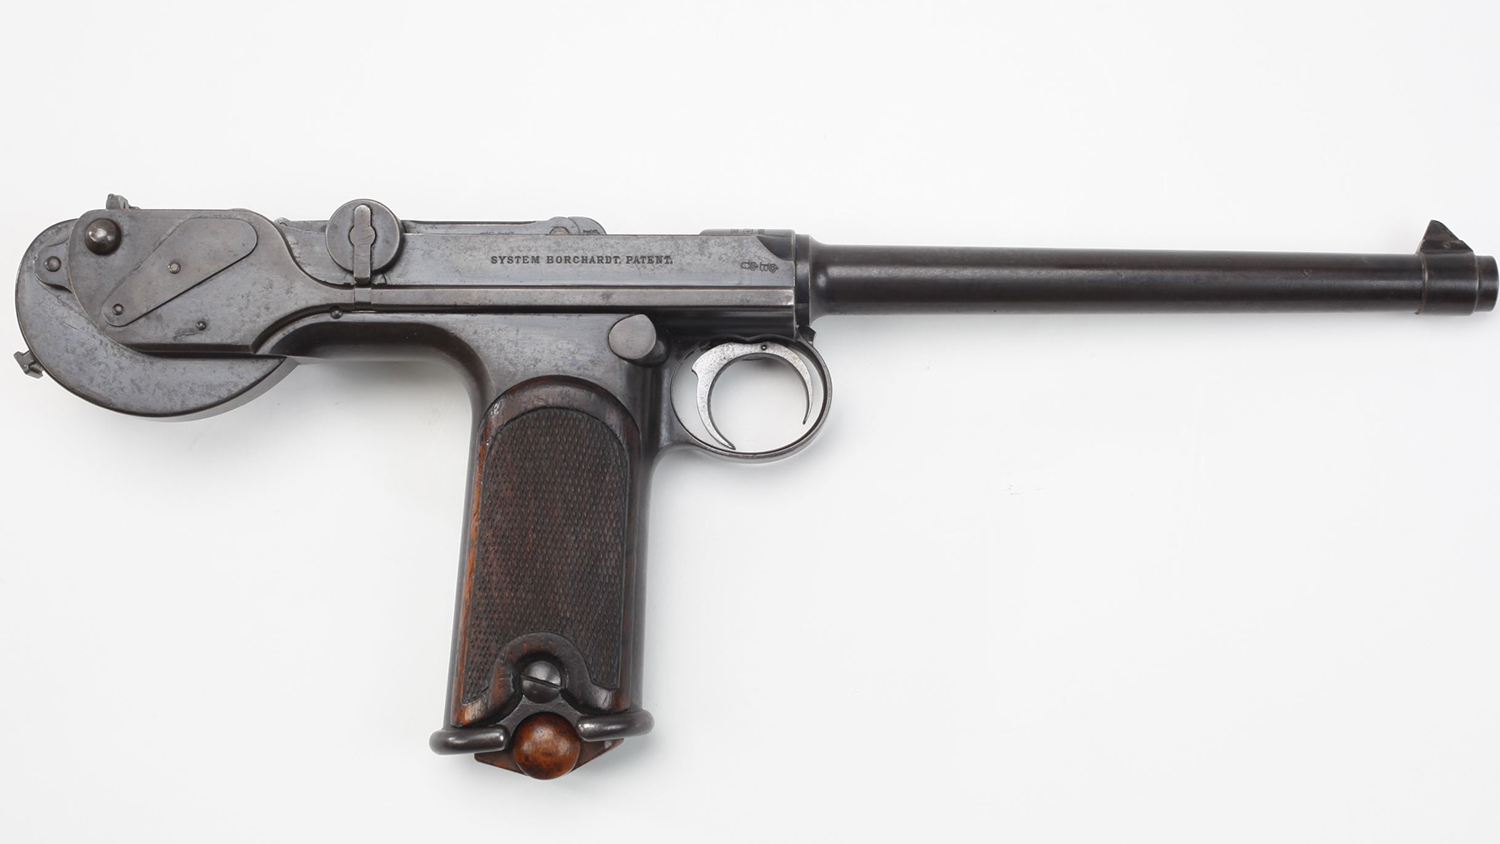 A Brief History of Firearms: Early Auto-loaders